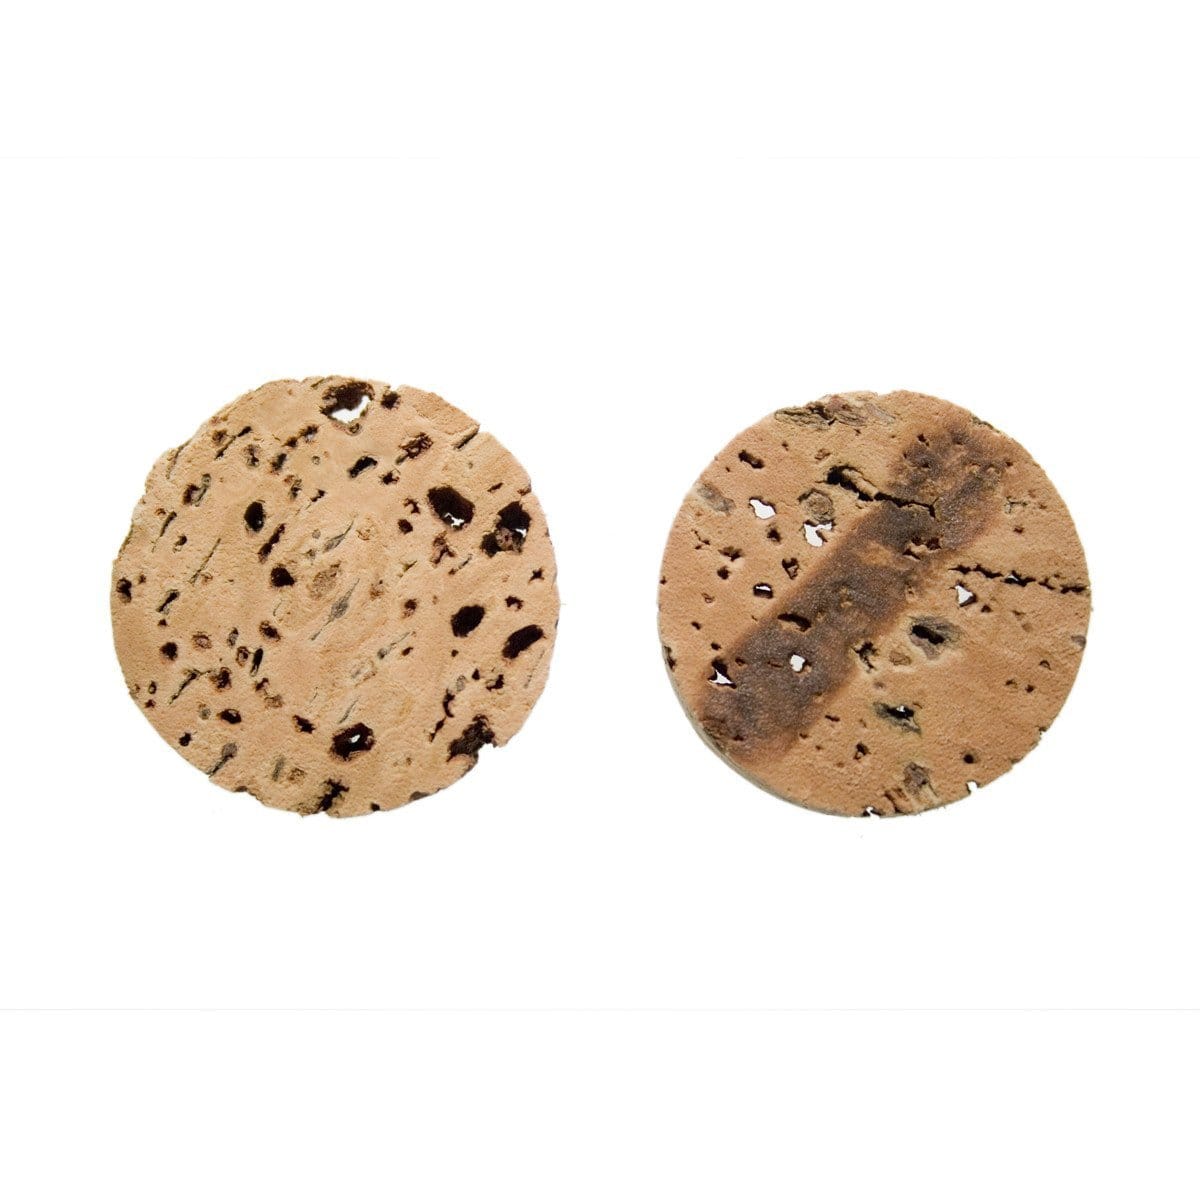 Natural Unvarnished Cork Crafting Discs – Pack of 10 - Naturally Anti-Microbial Hypoallergenic Sustainable Eco-Friendly Cork